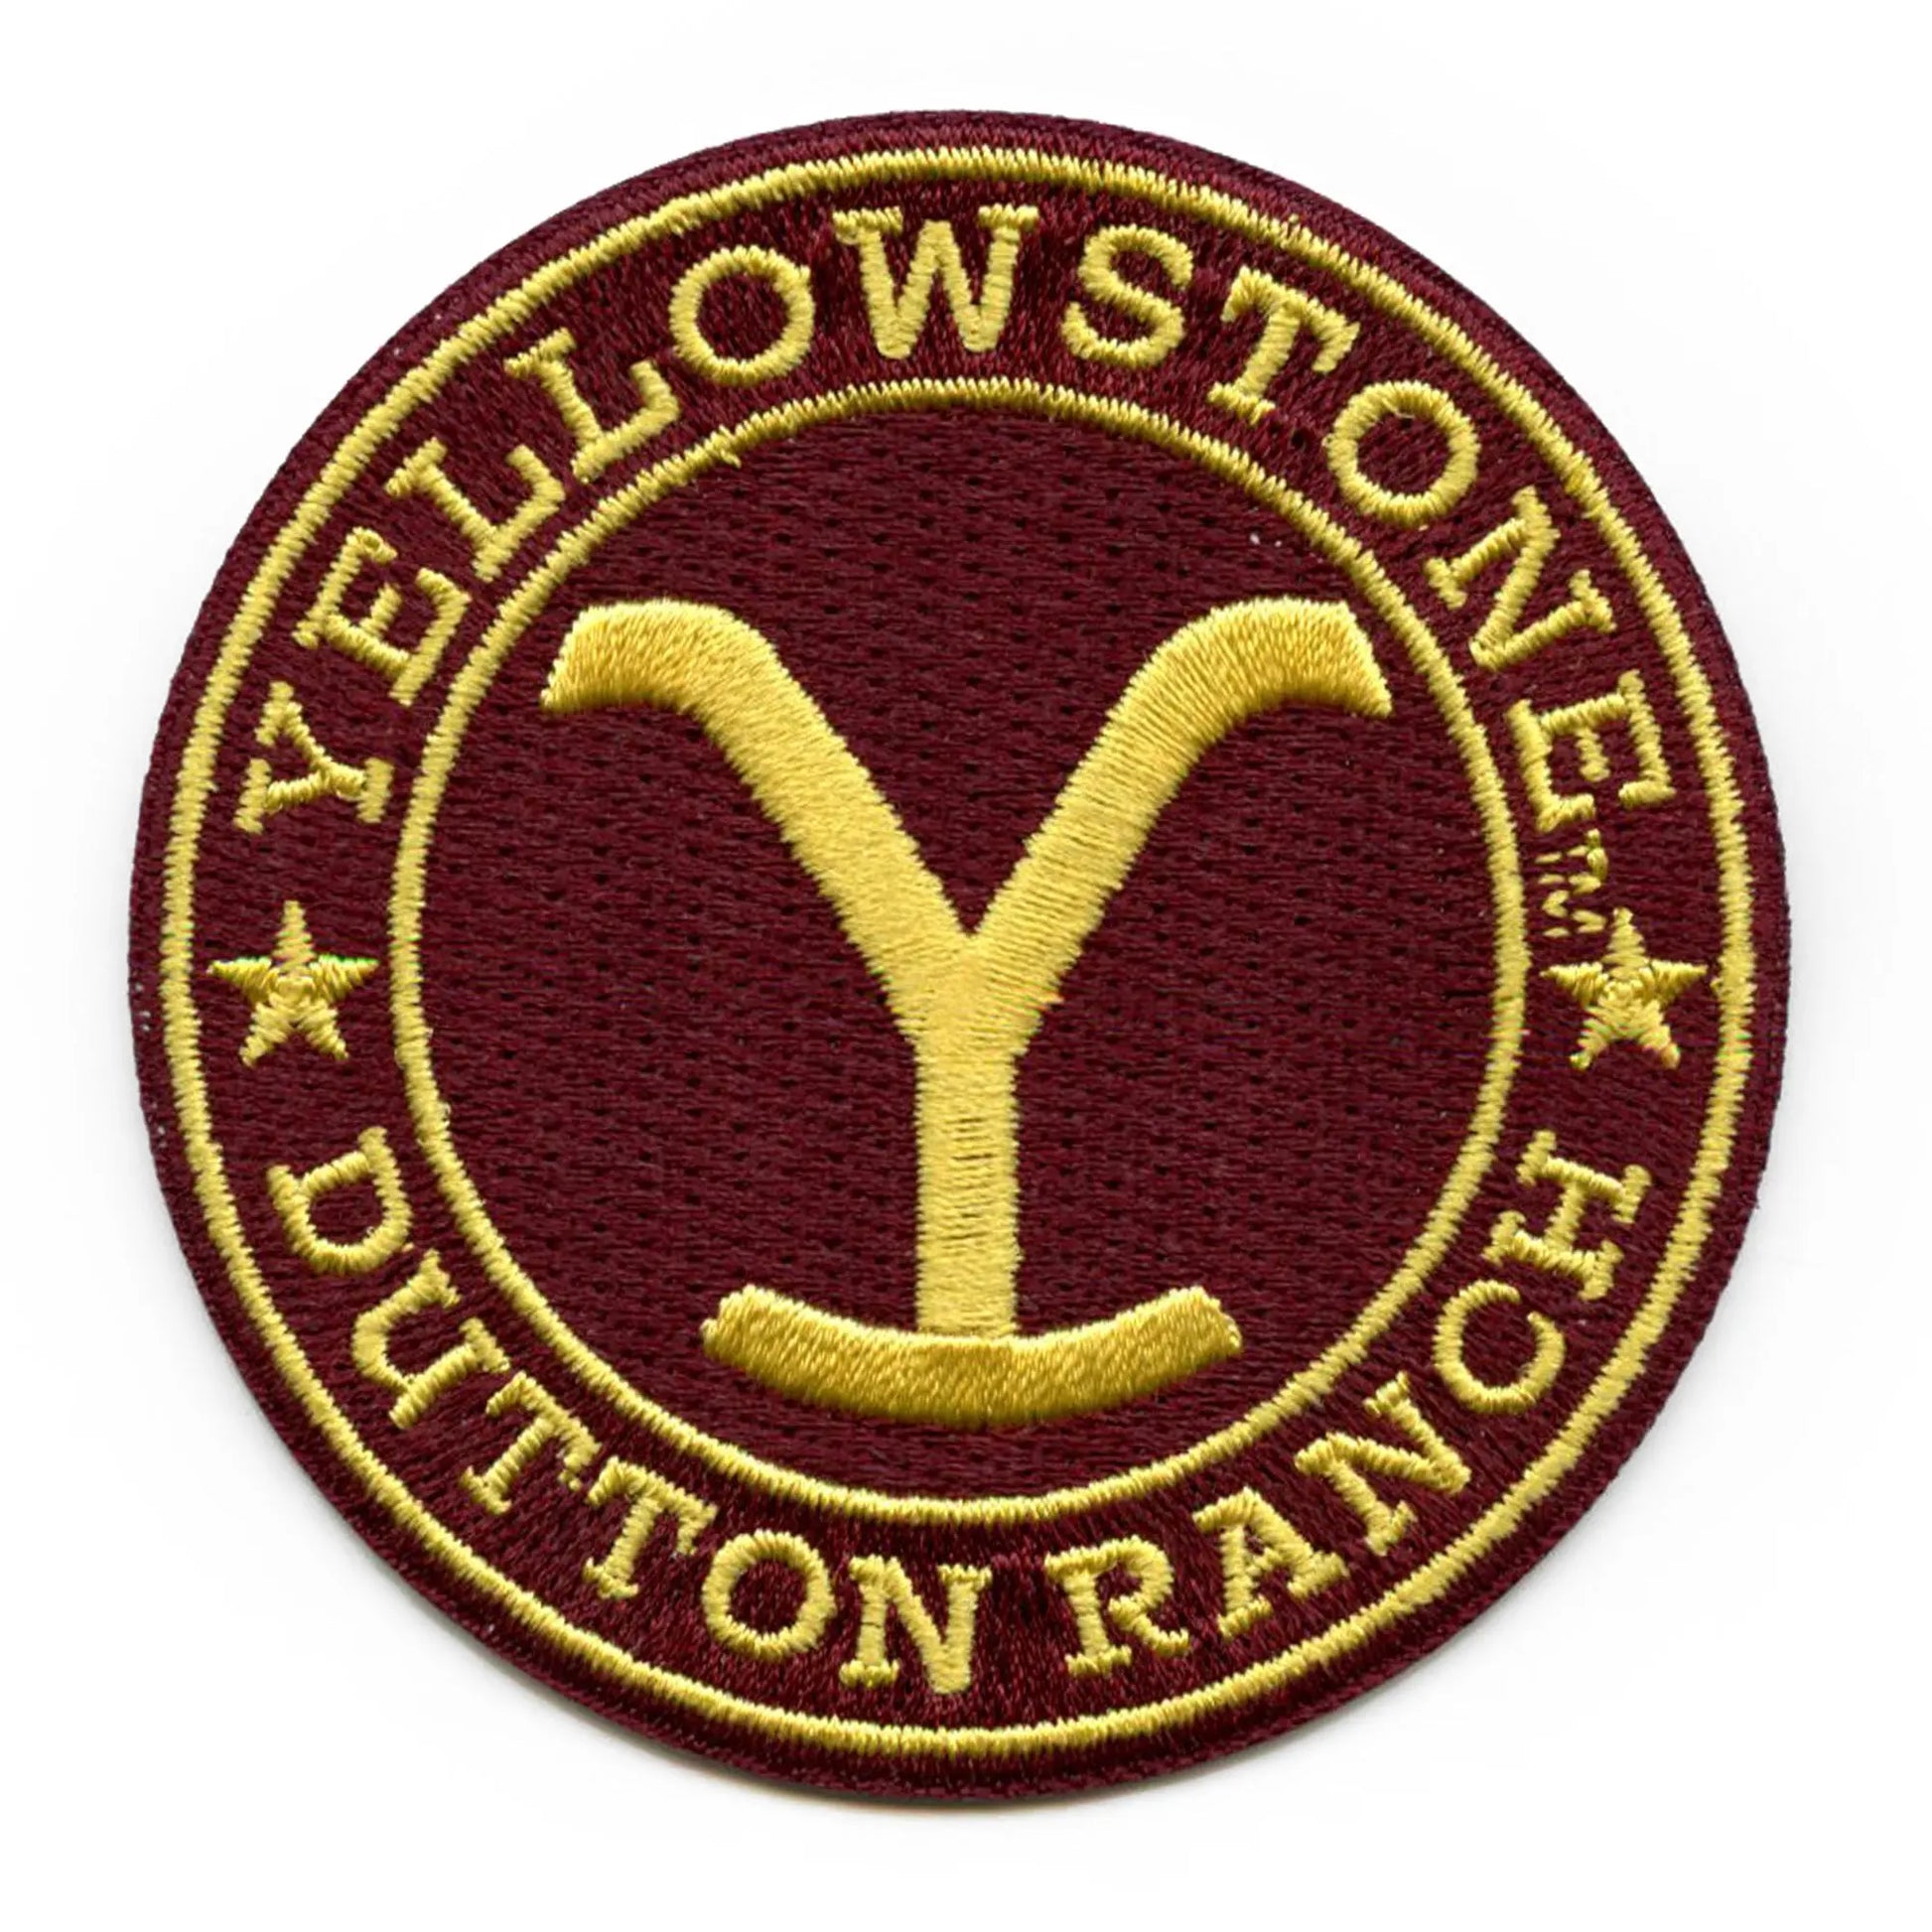 Yellowstone Embroidered Patch, Yellowstone National Park